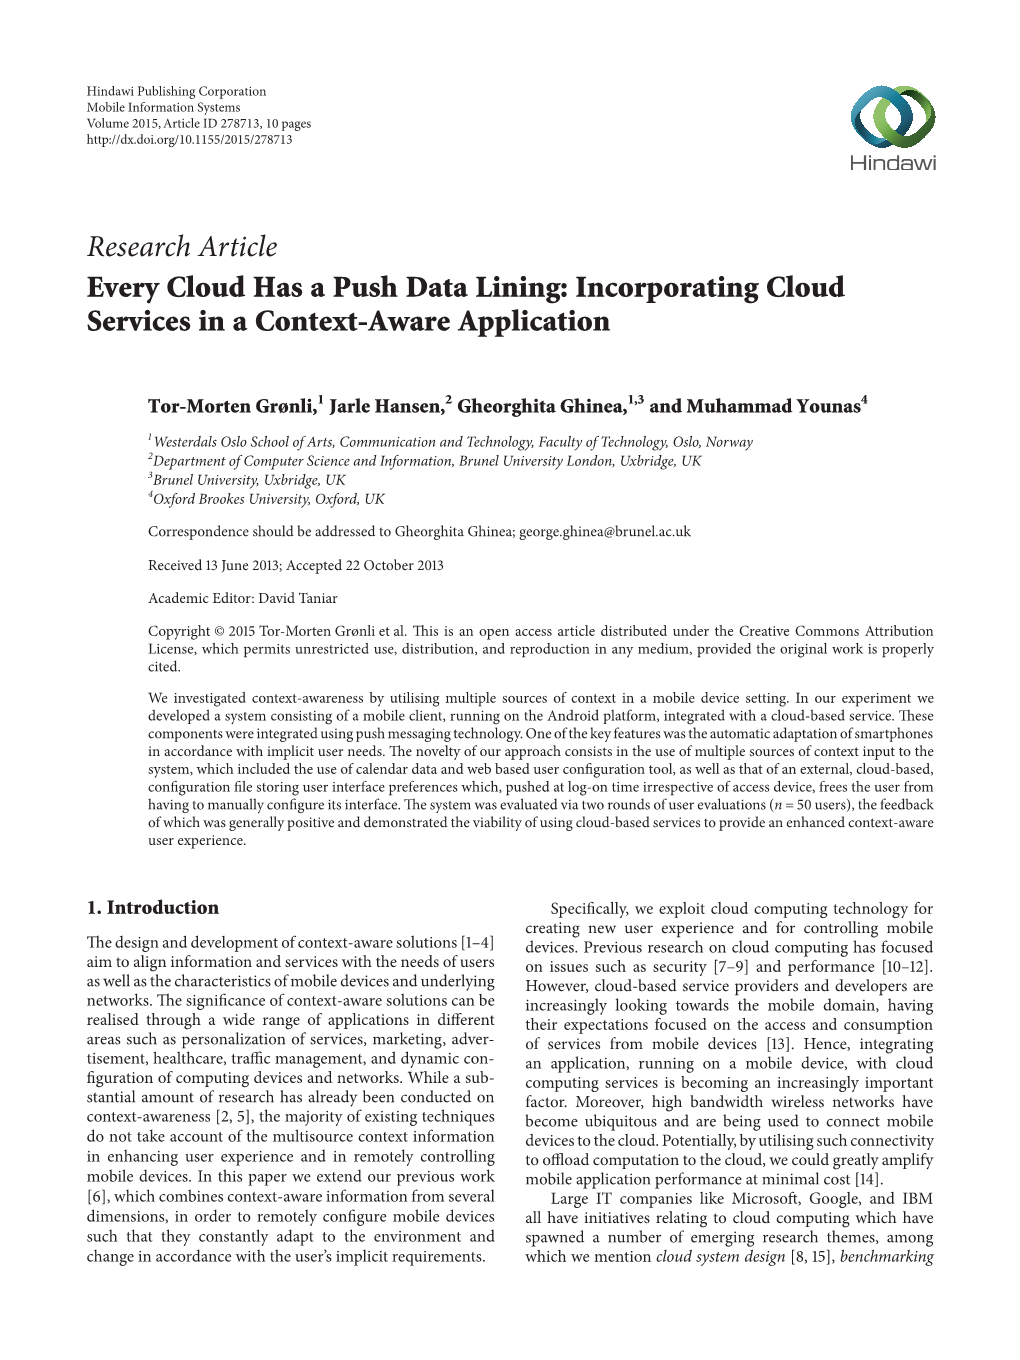 Every Cloud Has a Push Data Lining: Incorporating Cloud Services in a Context-Aware Application